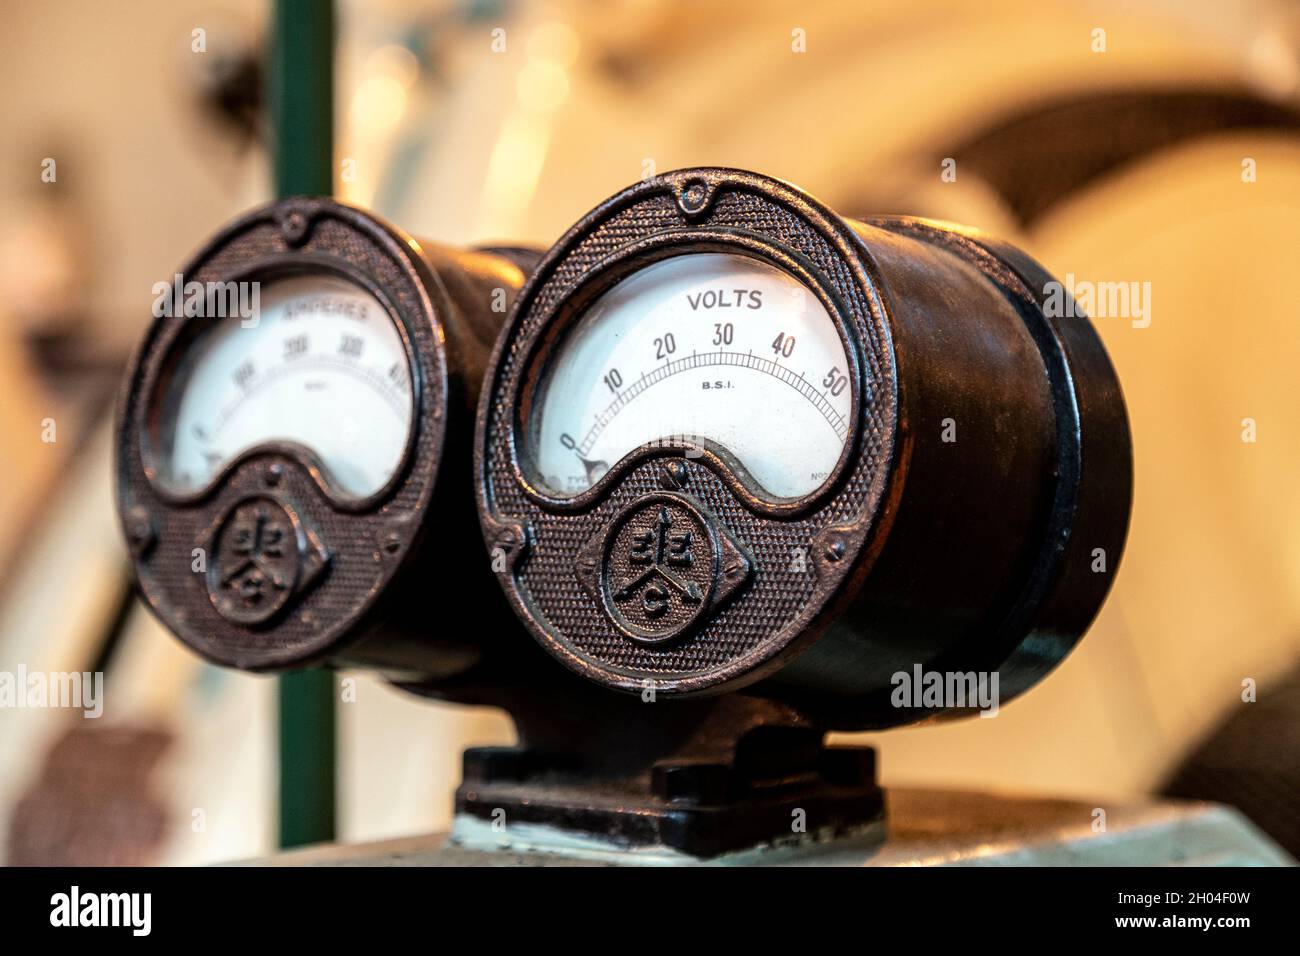 Meters showing the electrical feed to the pump motors at West India Dock Impounding Station, Canary Wharf, London, UK Stock Photo